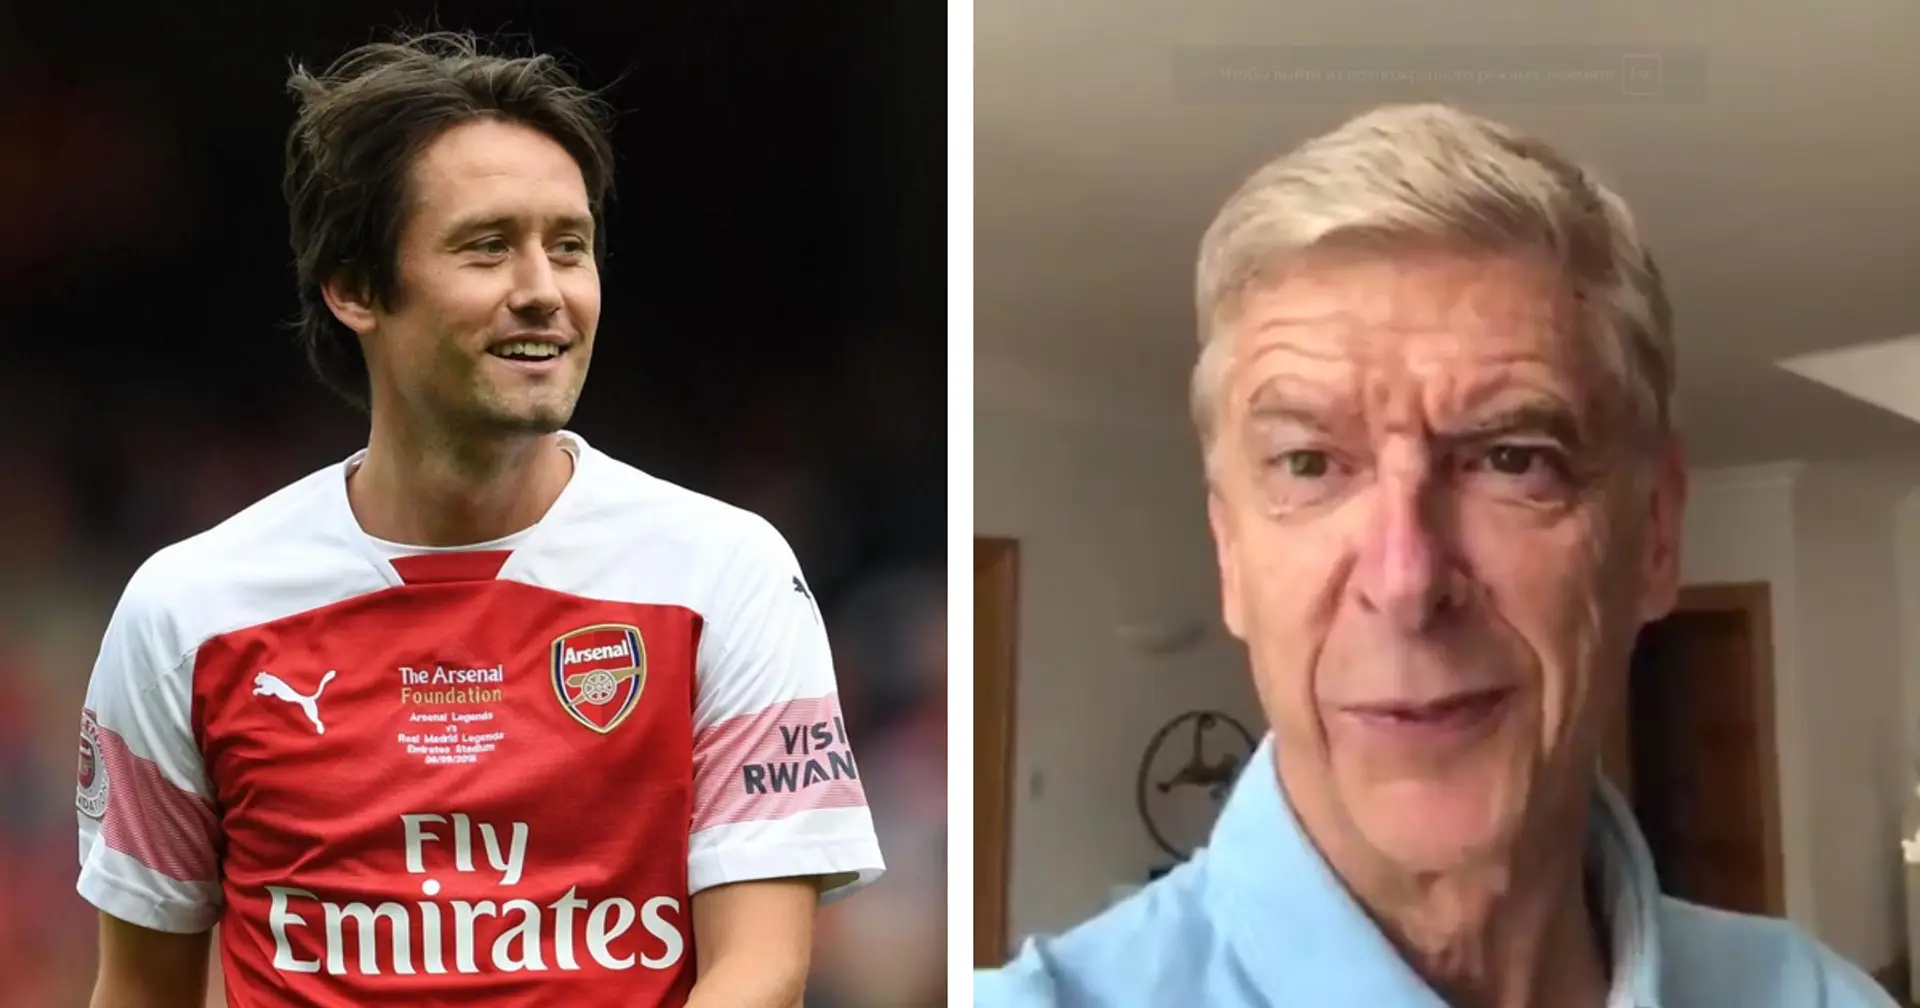 'I miss you!': Wenger salutes Rosicky on Little Mozart's 40th birthday (video)